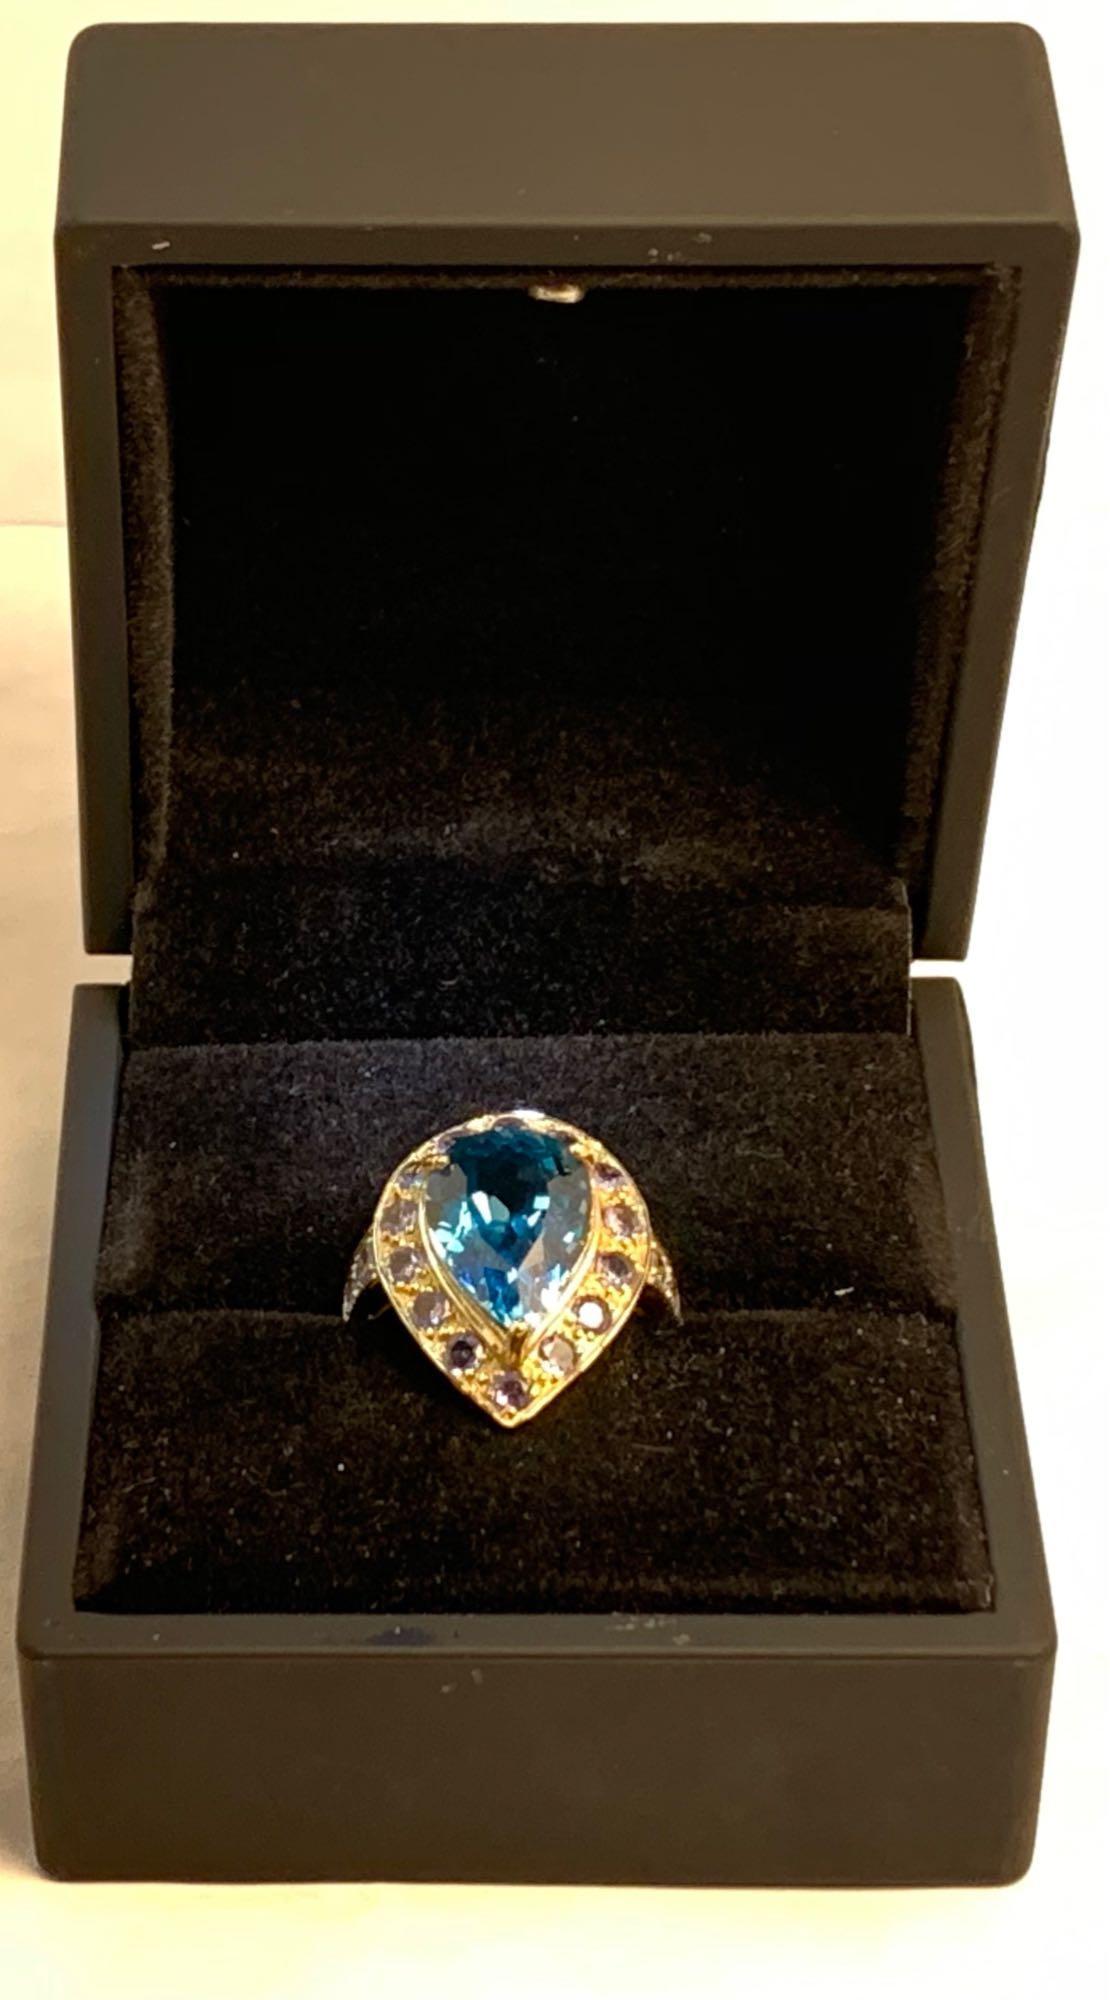 10kt yellow gold ring 6.50 CTW 5.50 blue topaz and 1.00 ct tanzanite